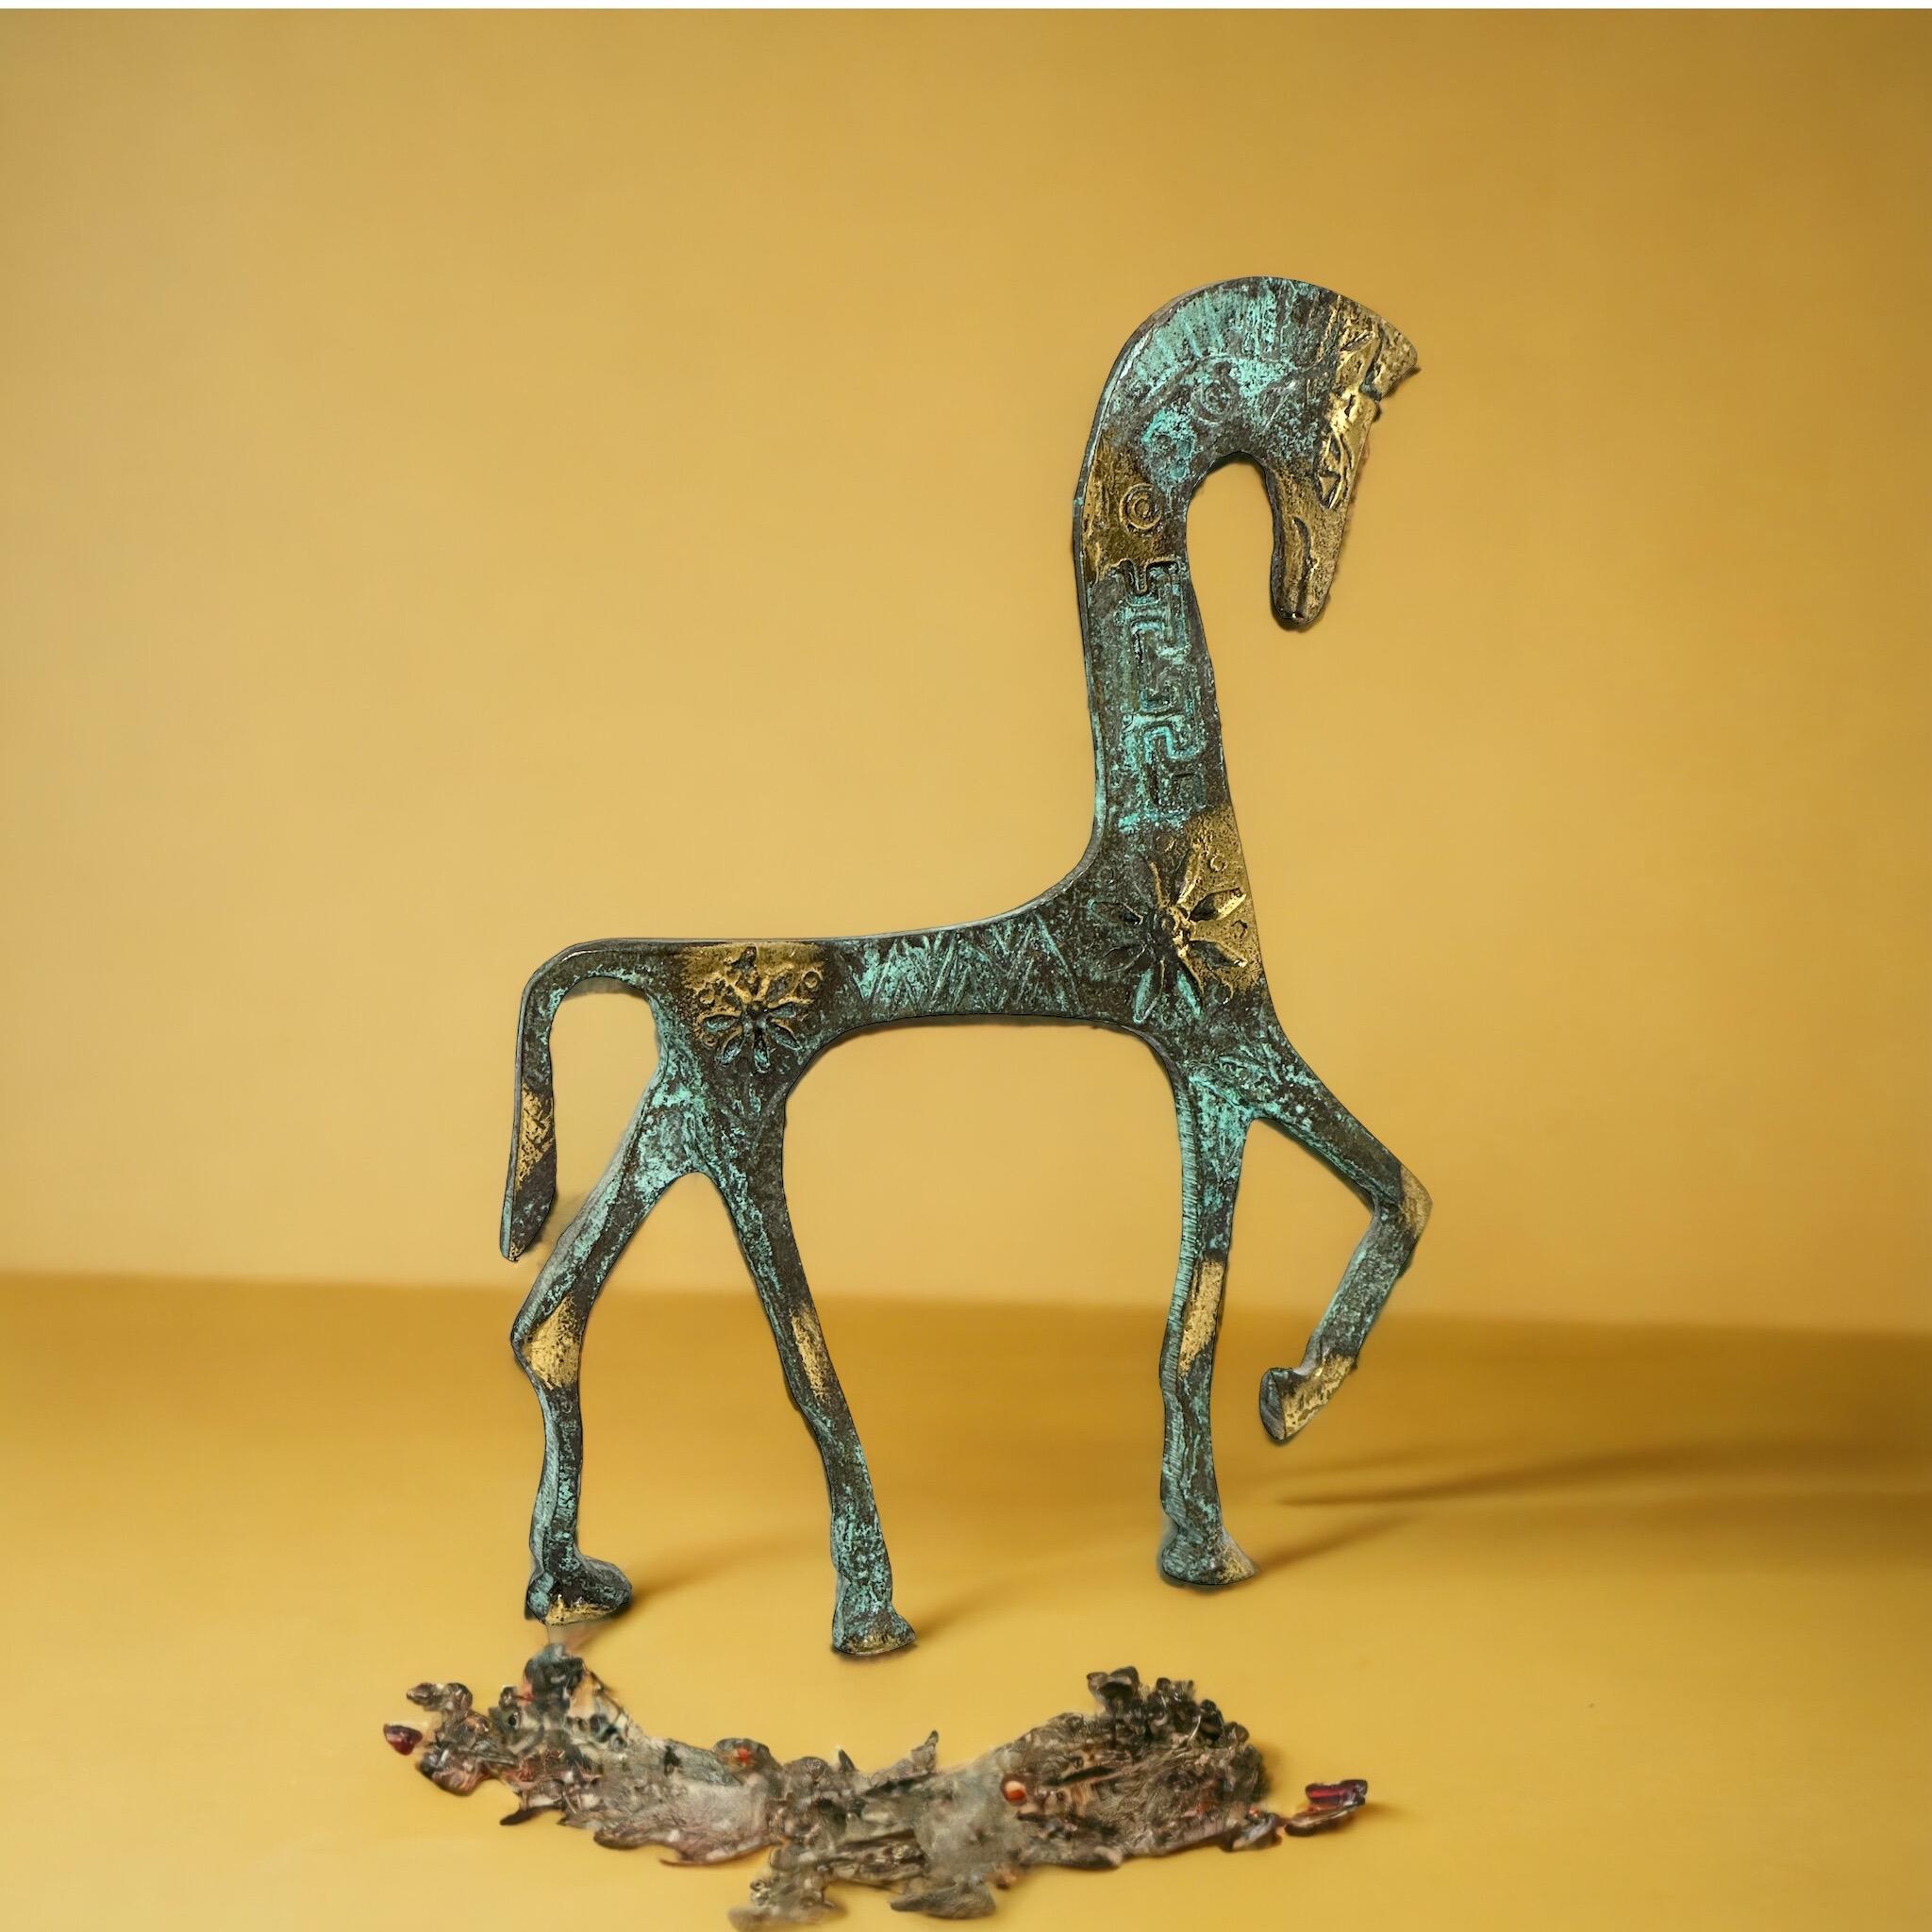 This is a bronze sculpture, in the style of the antique statues and figures of the Etruscans. It is a gorgeous interior furnishing item, an incredibly stylized Etruscan Chariot and has a patina finish. Greece-made and great for any Mid-Century